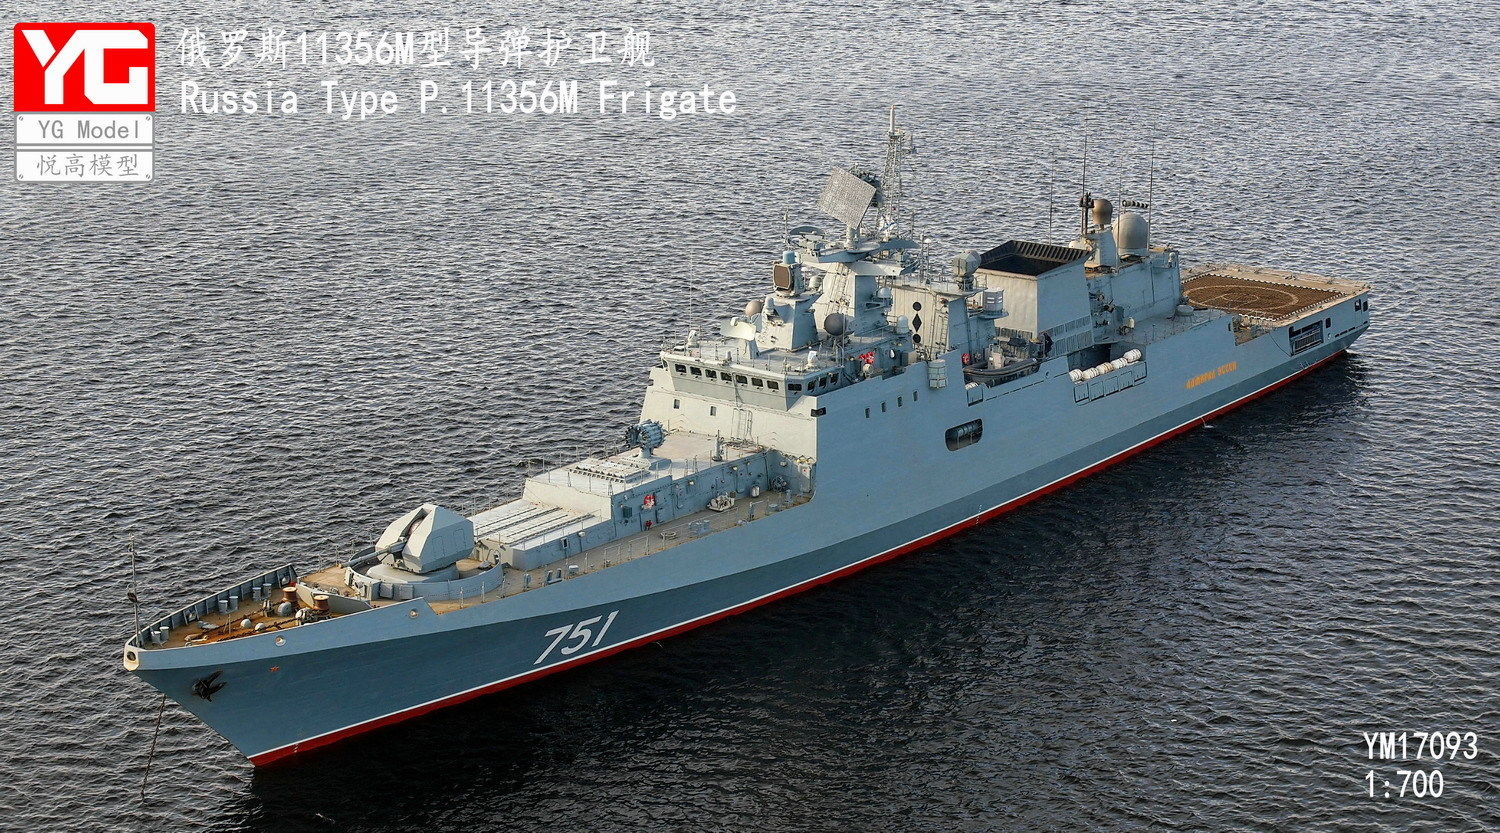 new version YG resin kit 1/700 Russian Type P.22350 Guide Missile Frigate 